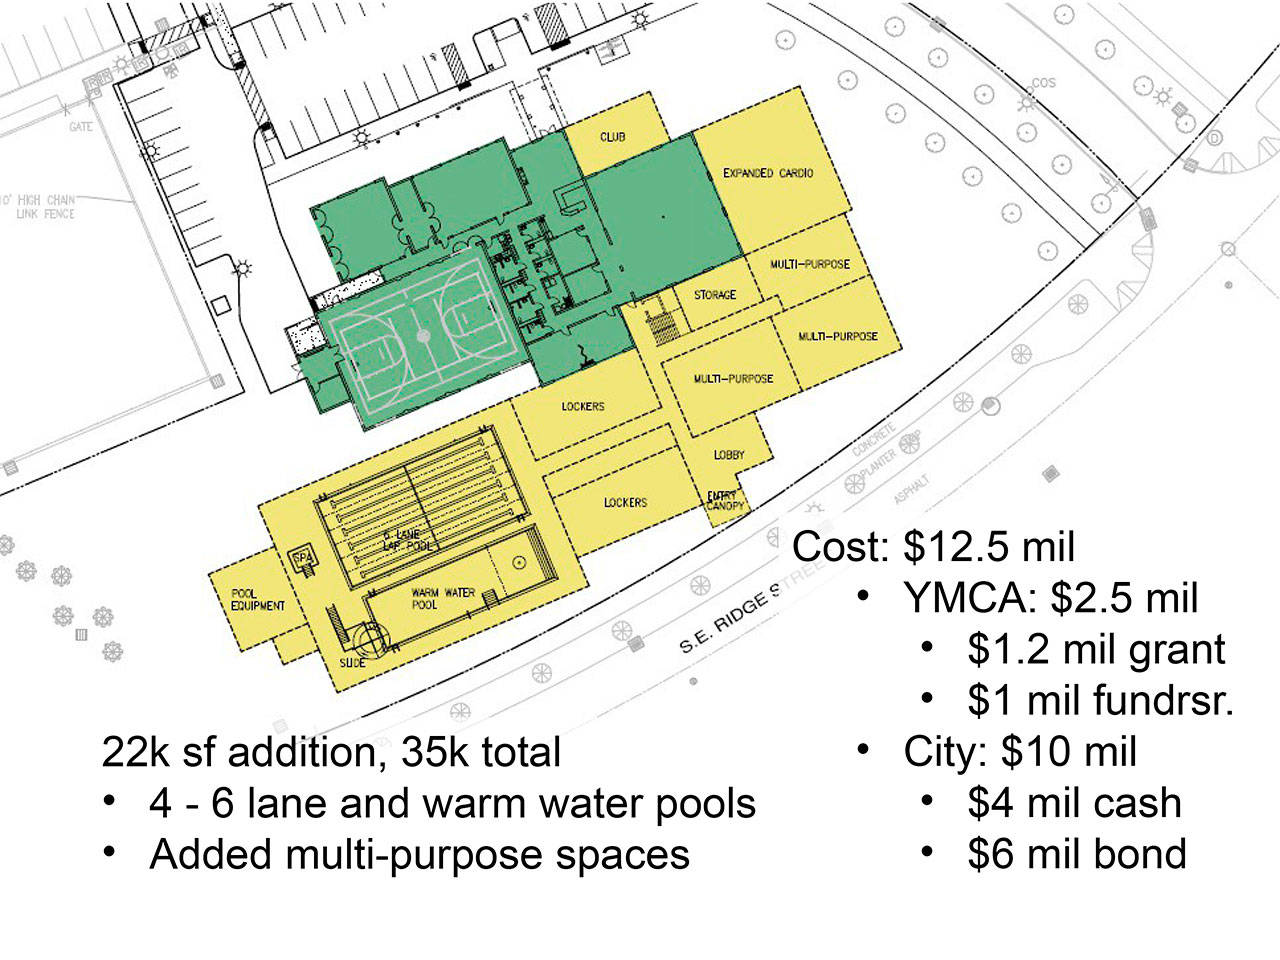 A conceptual design of the proposed YMCA expansion put forth by the city of Snoqualmie. Courtesy Photo